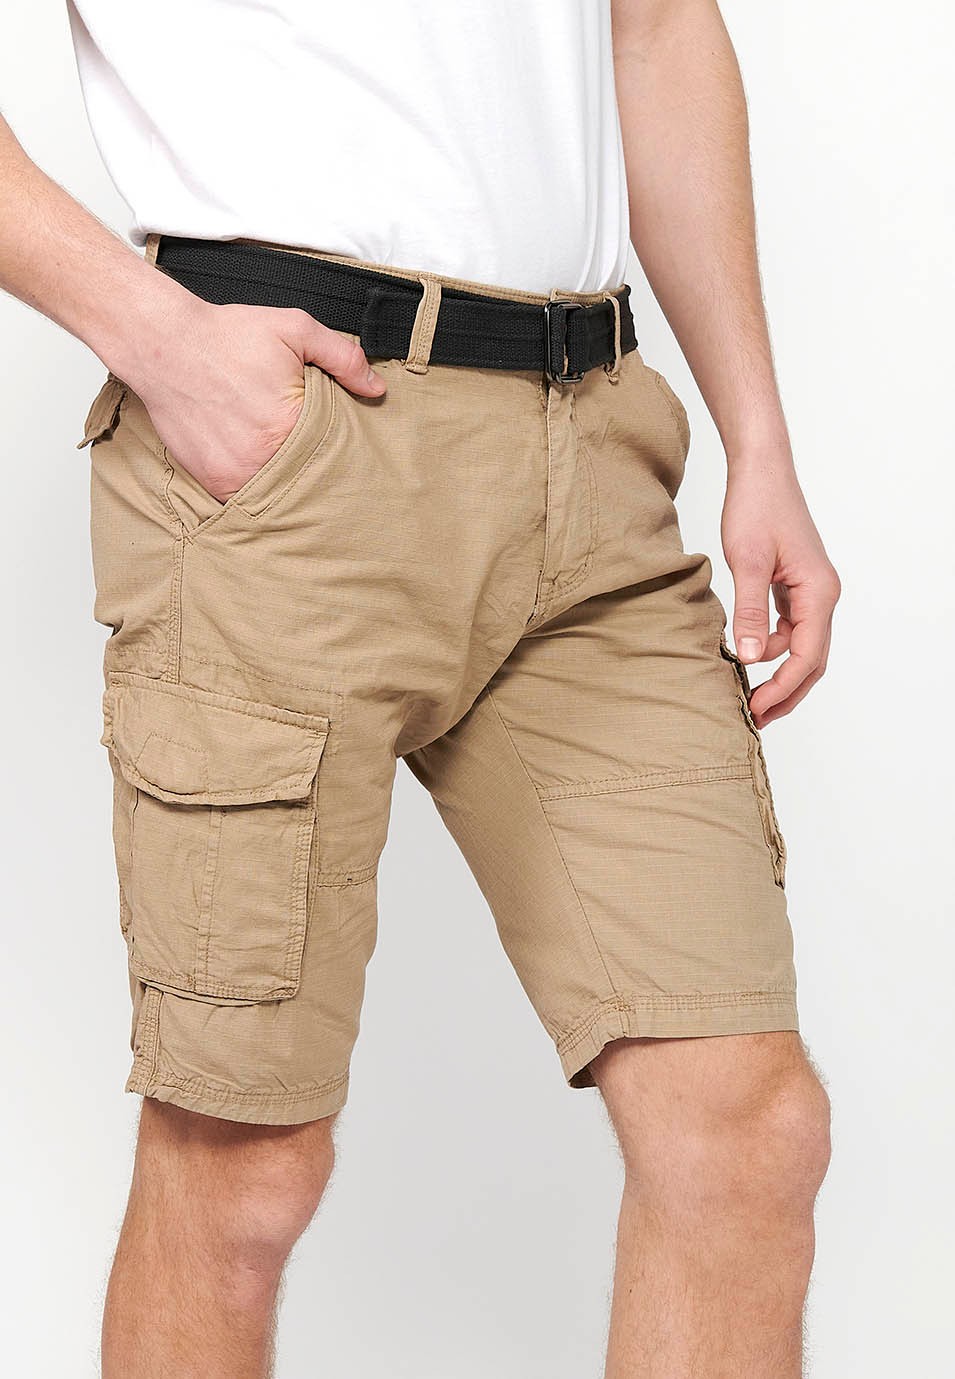 Cotton cargo shorts with belt and front closure with zipper and button with pockets, two back pockets with flap and two cargo pants in Beige Color for Men 4